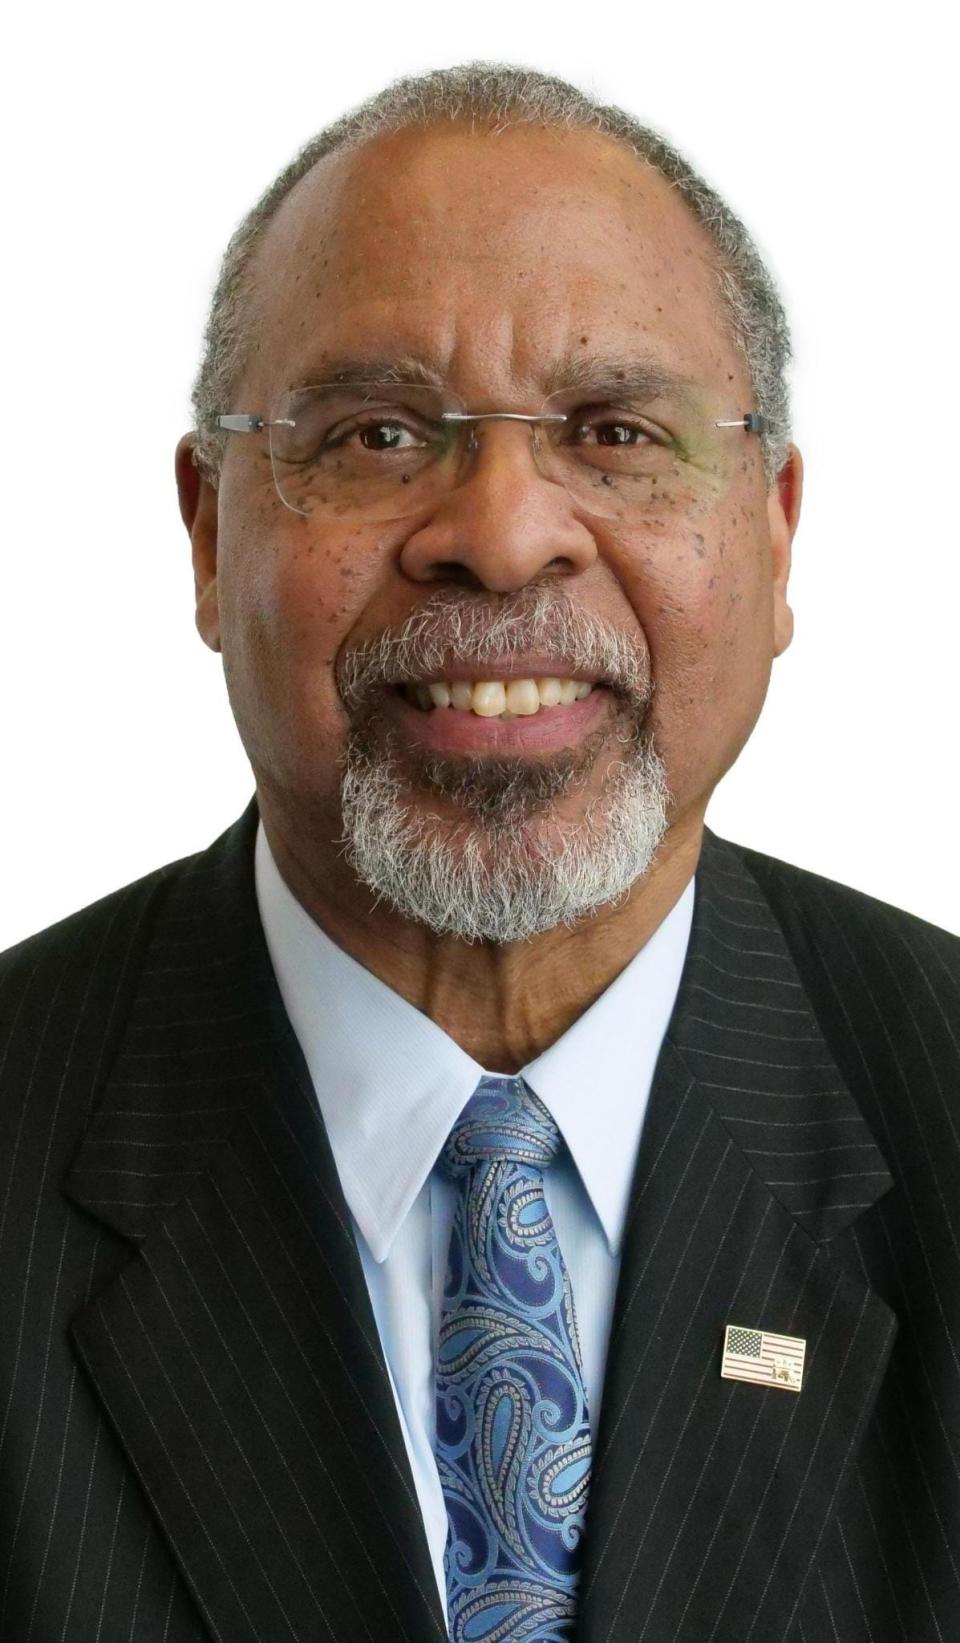 Ken Blackwell is a former Ohio secretary of state.